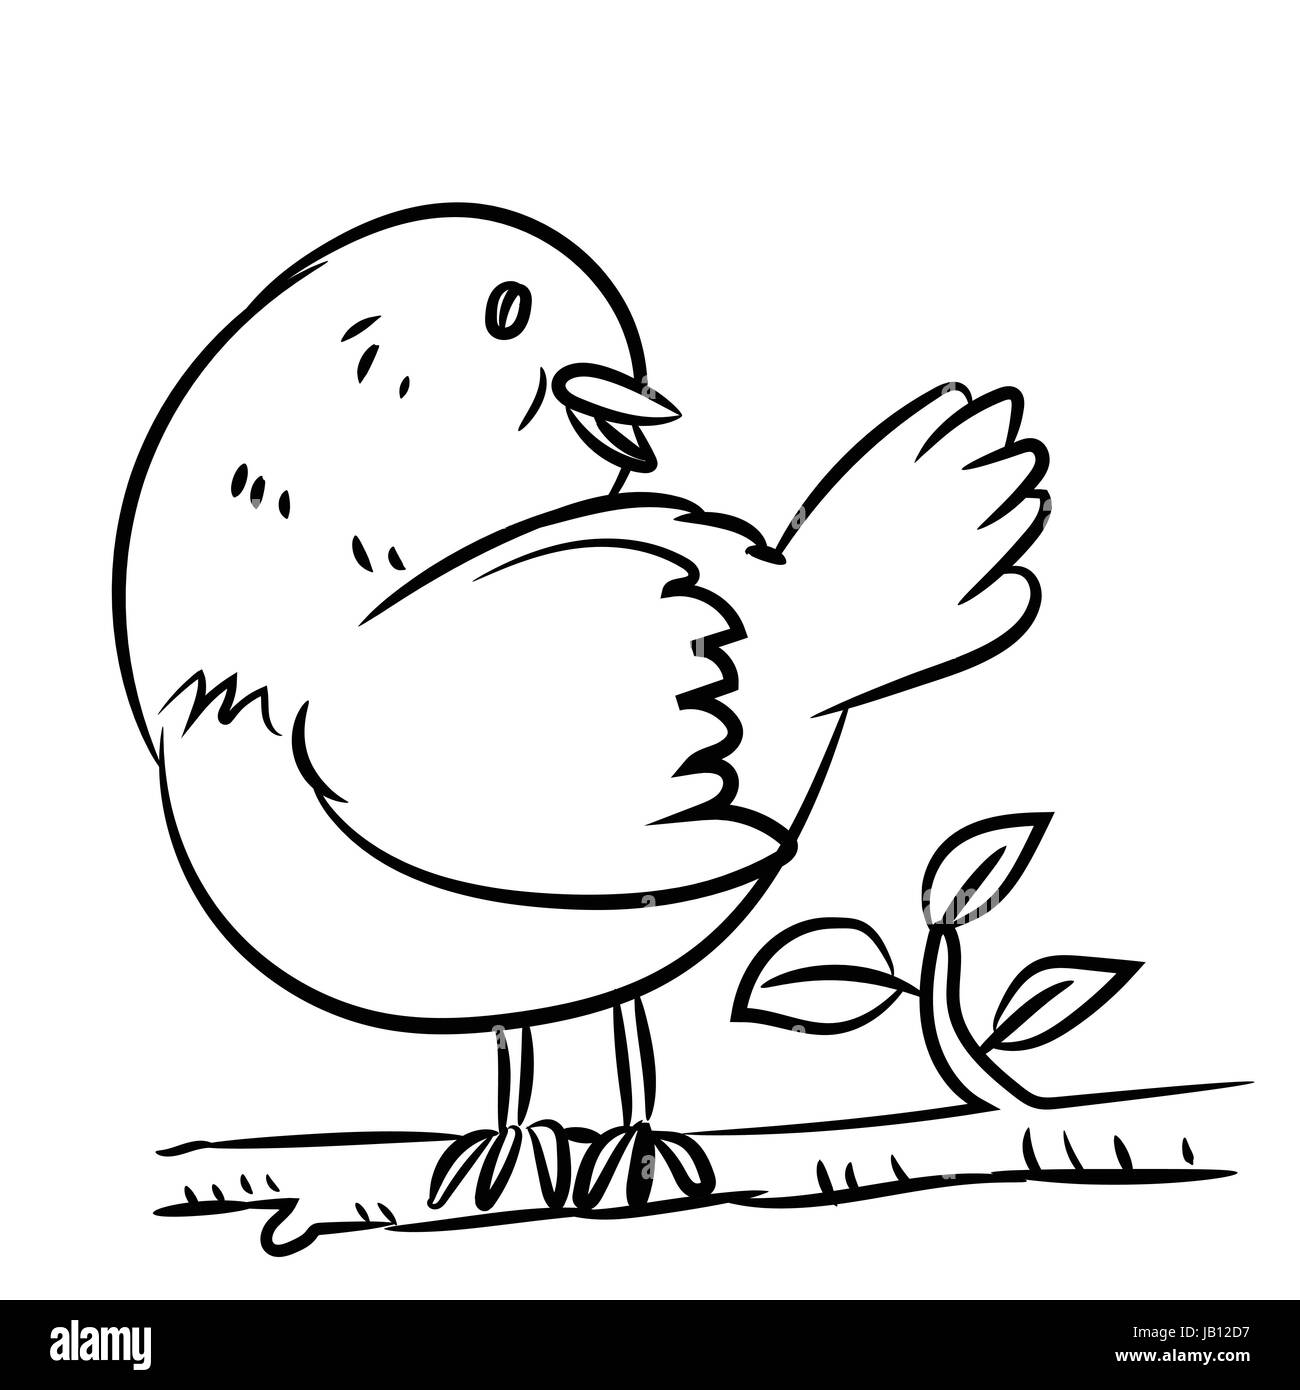 Line drawing cartoon a bird on branch of tree in black and white - Vector illustration Stock Vector